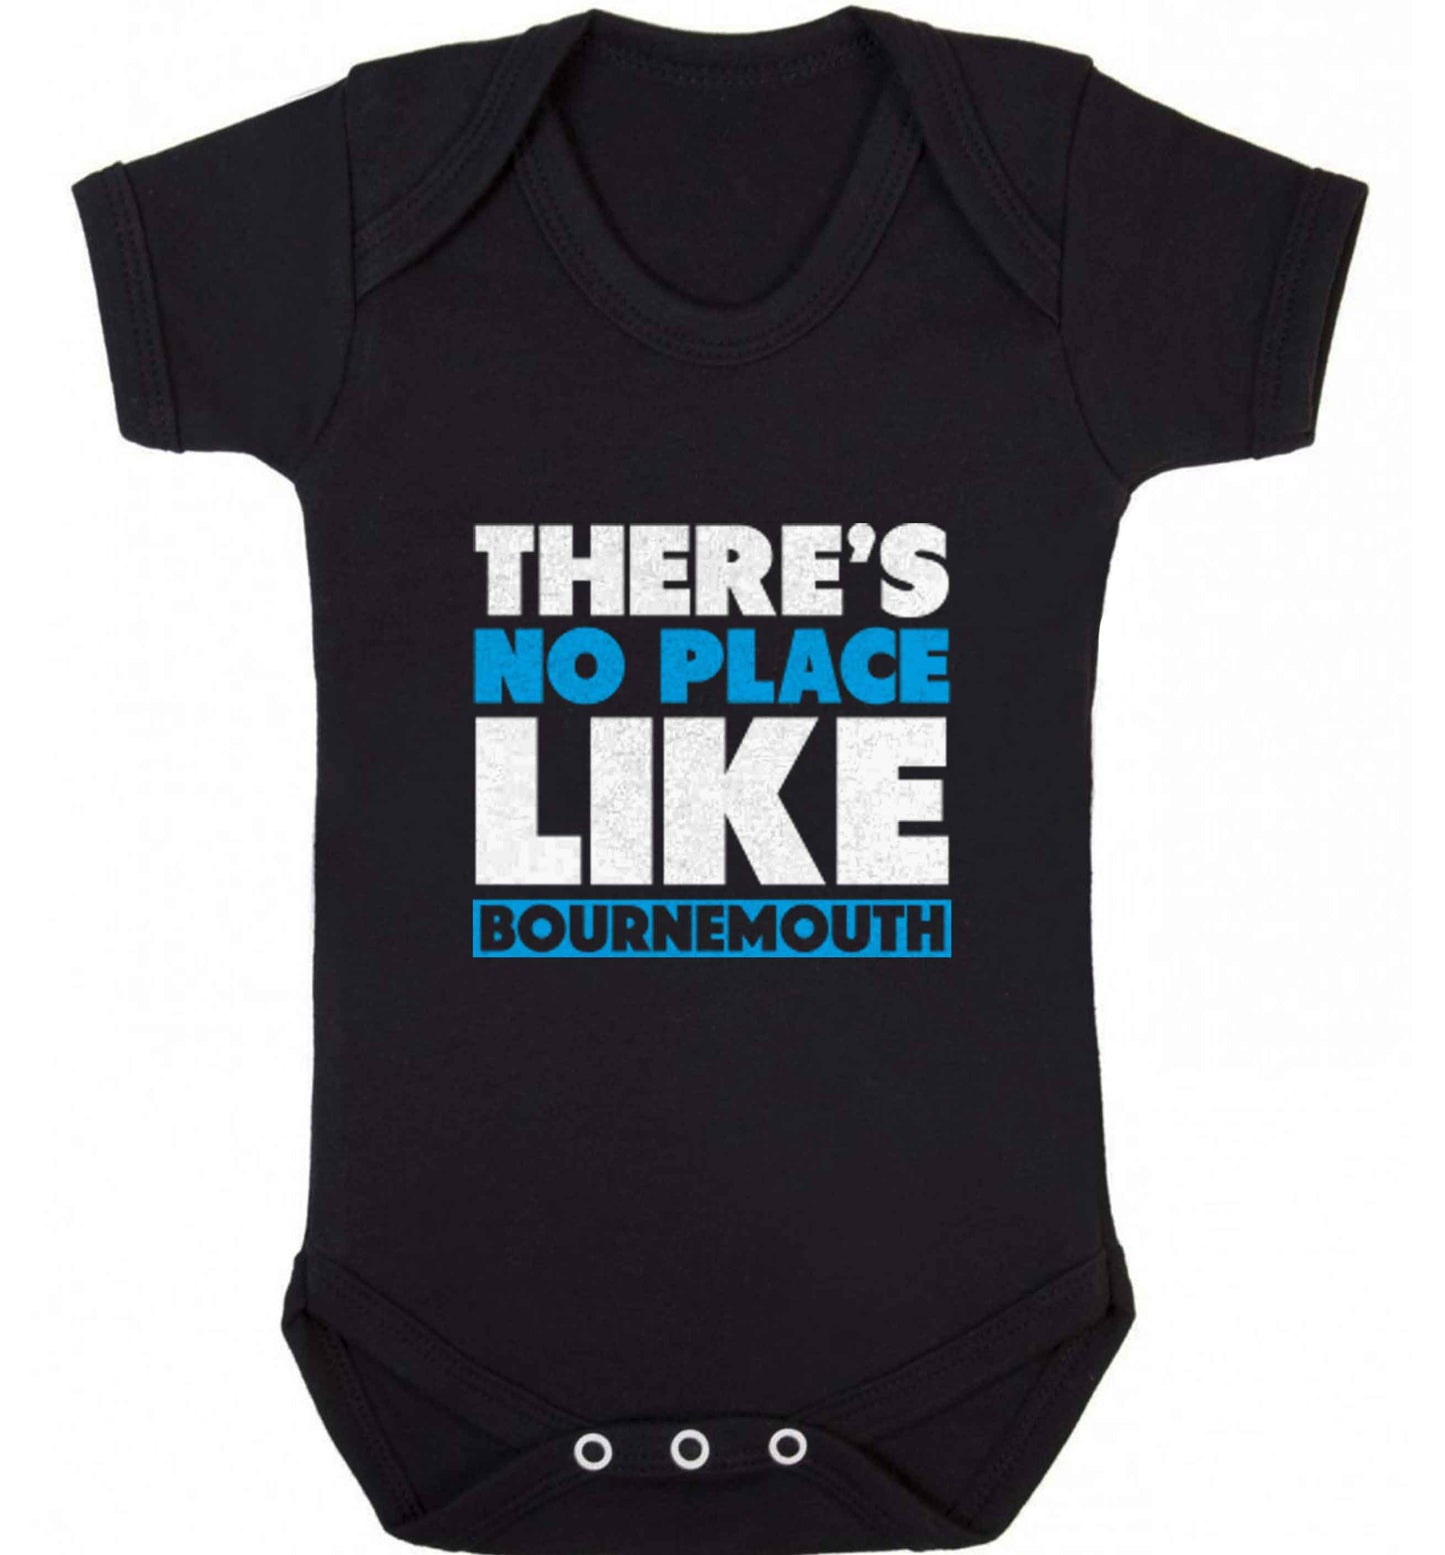 There's no place like Bournemouth baby vest black 18-24 months